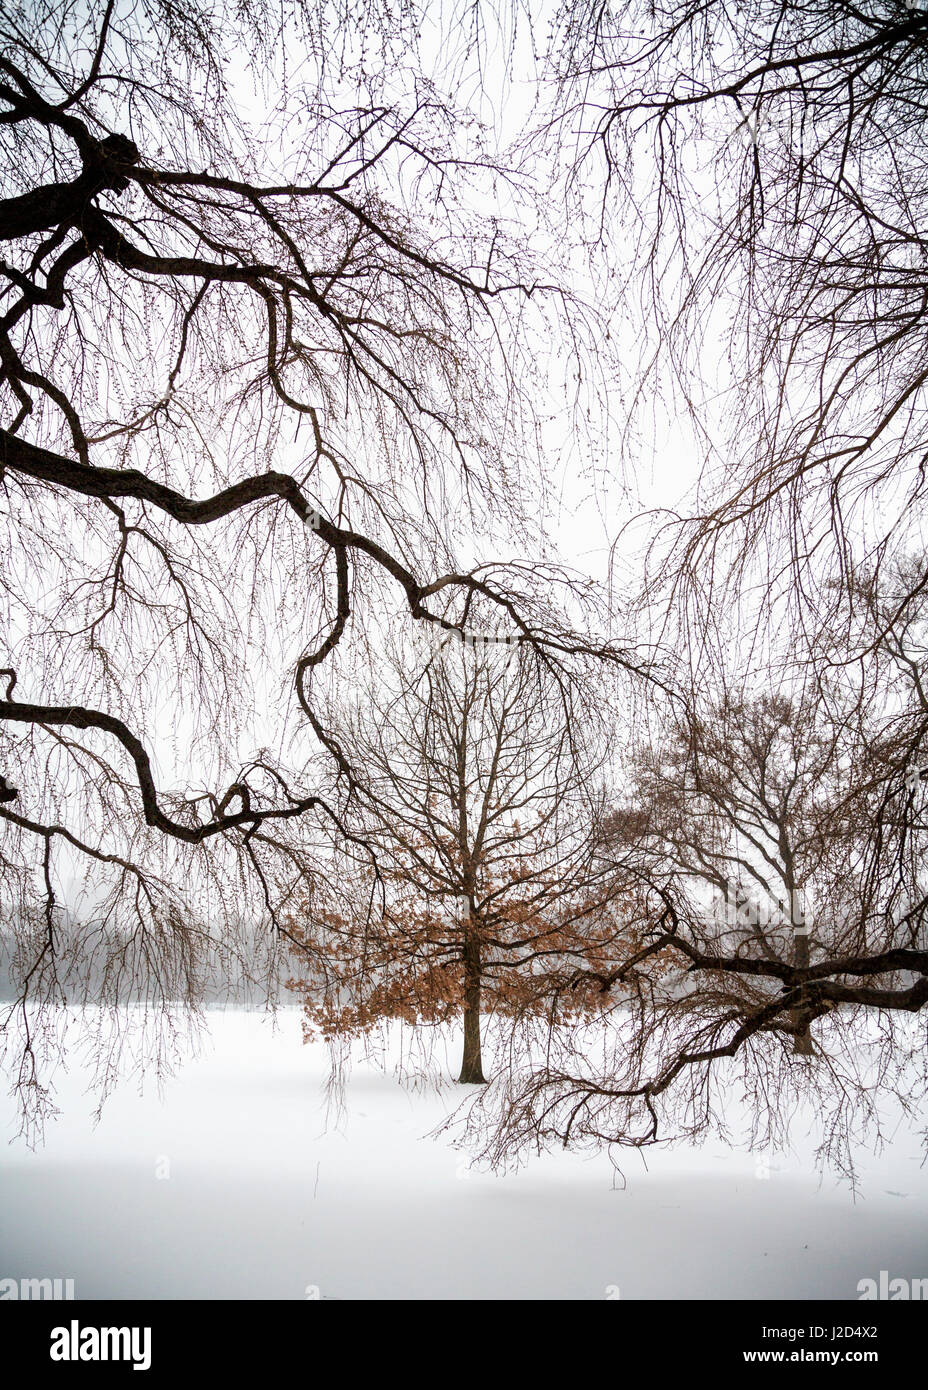 Barren Tree Branches in Central Park in the Snow Stock Photo